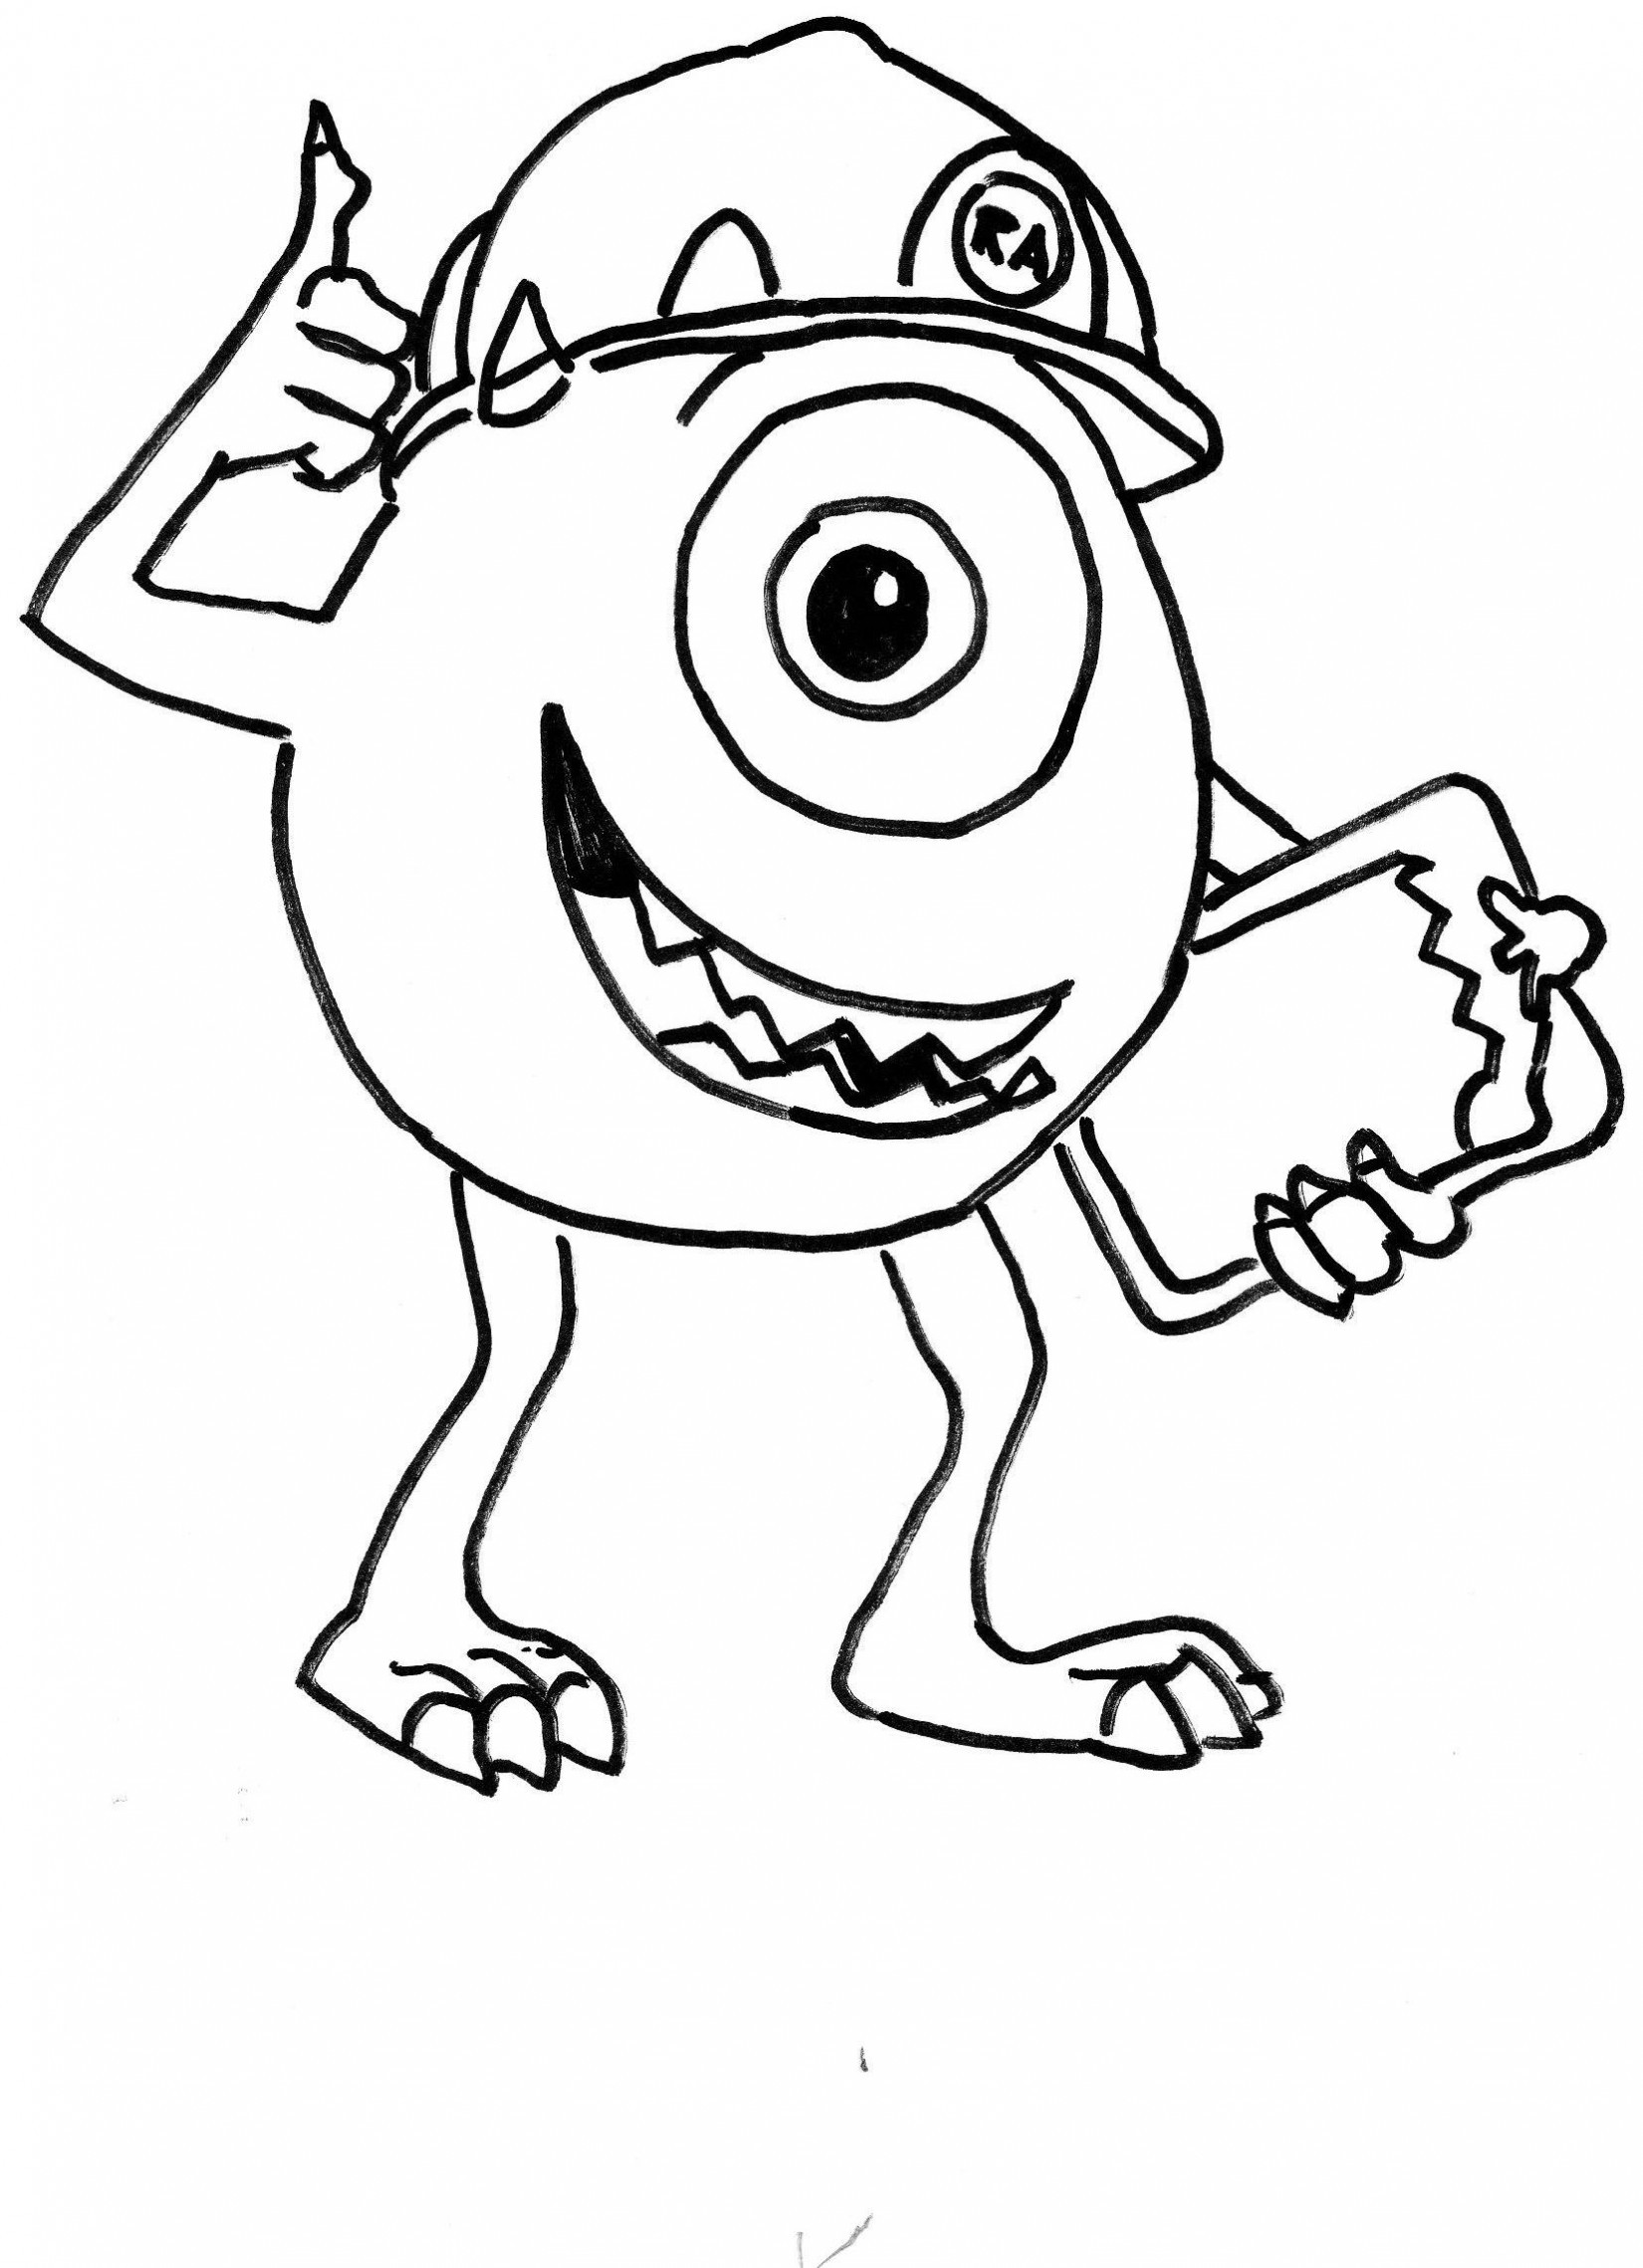 Coloring Sheets Kids
 coloring pages for kids